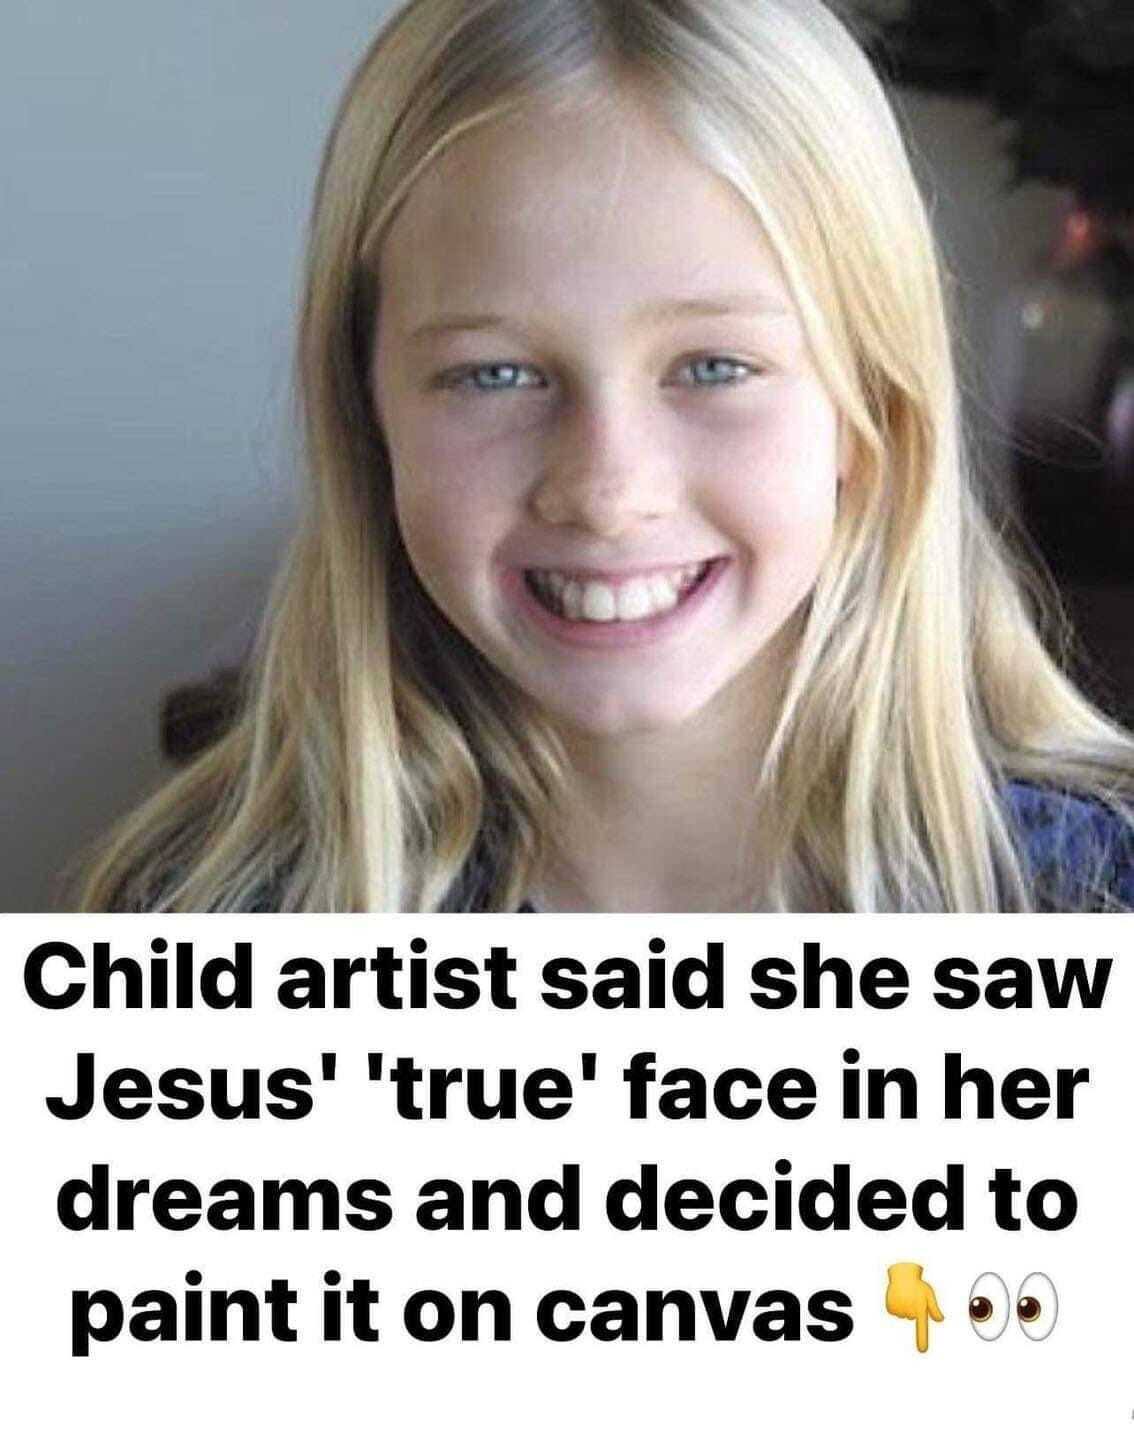 Child artist Akiane Kramarik said she saw Jesus’ ‘true’ face in her dreams and decided to paint it on canvas. Check the comments to see the painting 👇❤️